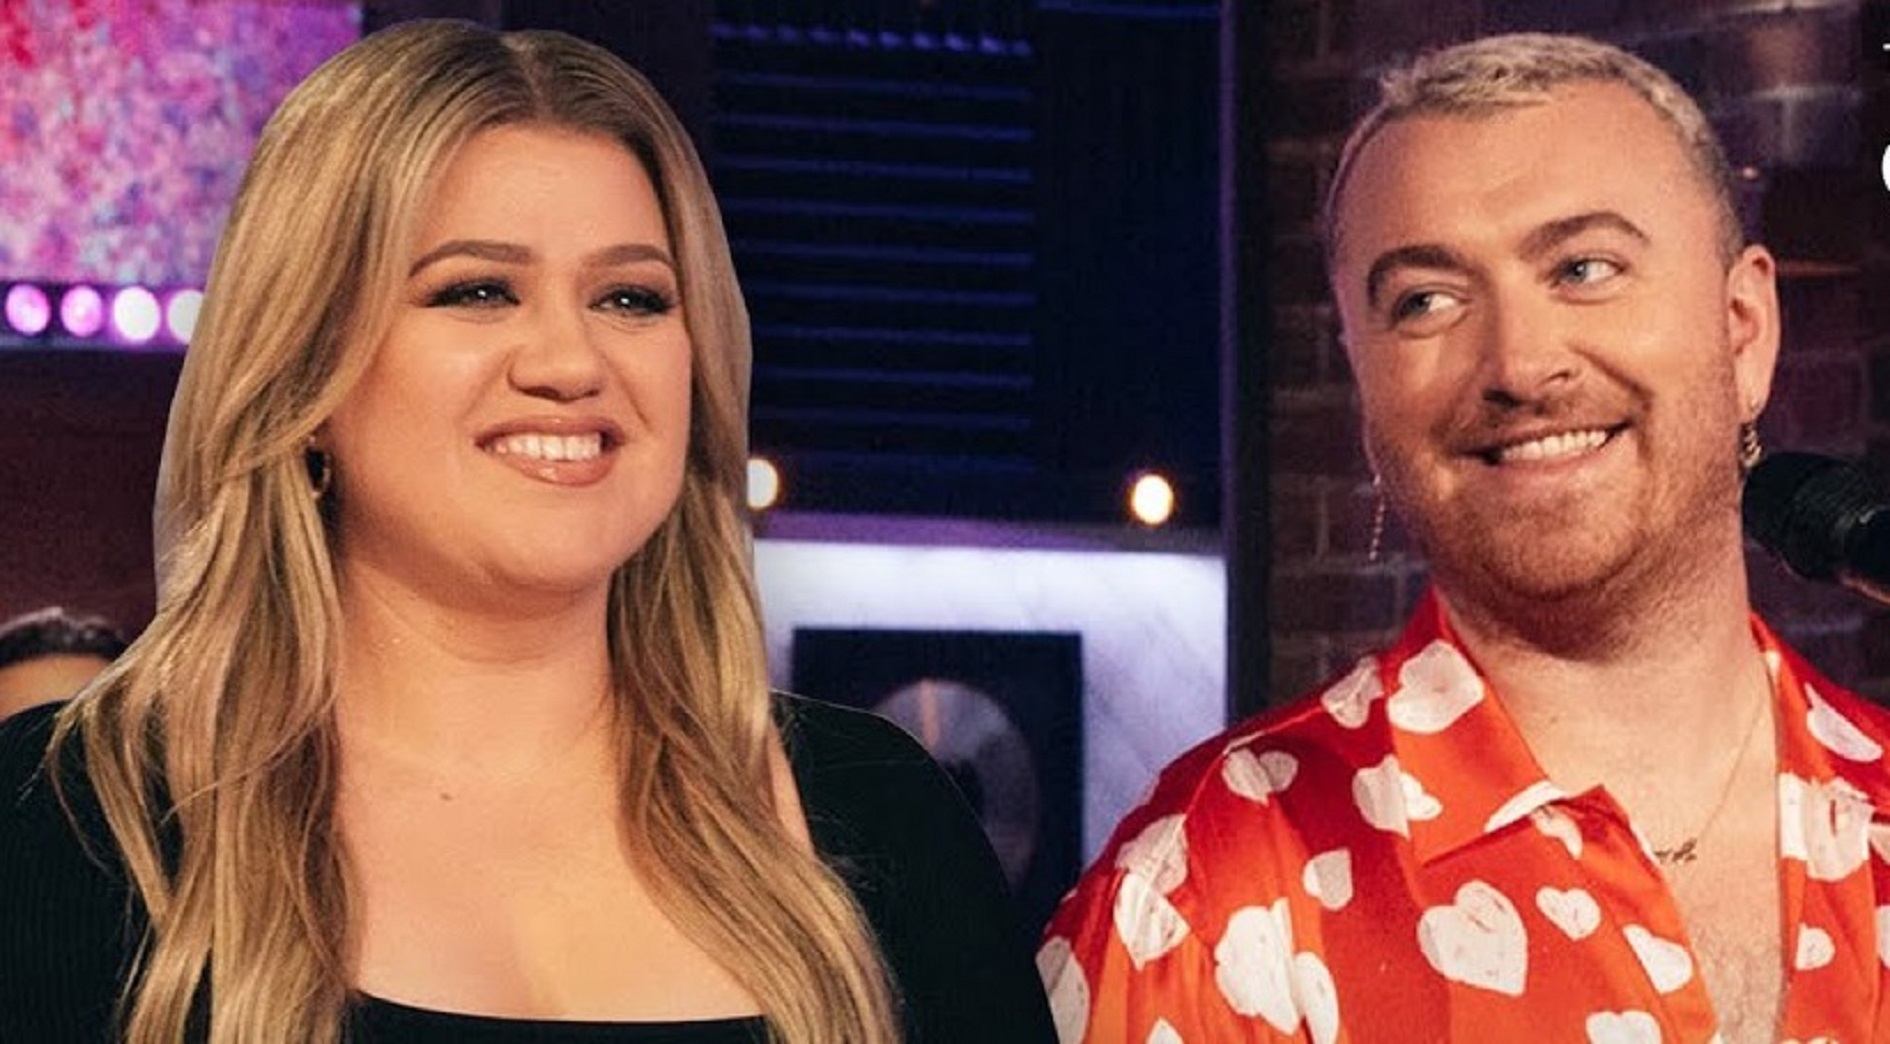 Watch: Sam Smith & Kelly Clarkson Duet For A Sensational Cover Of Her Hit ‘Breakaway’